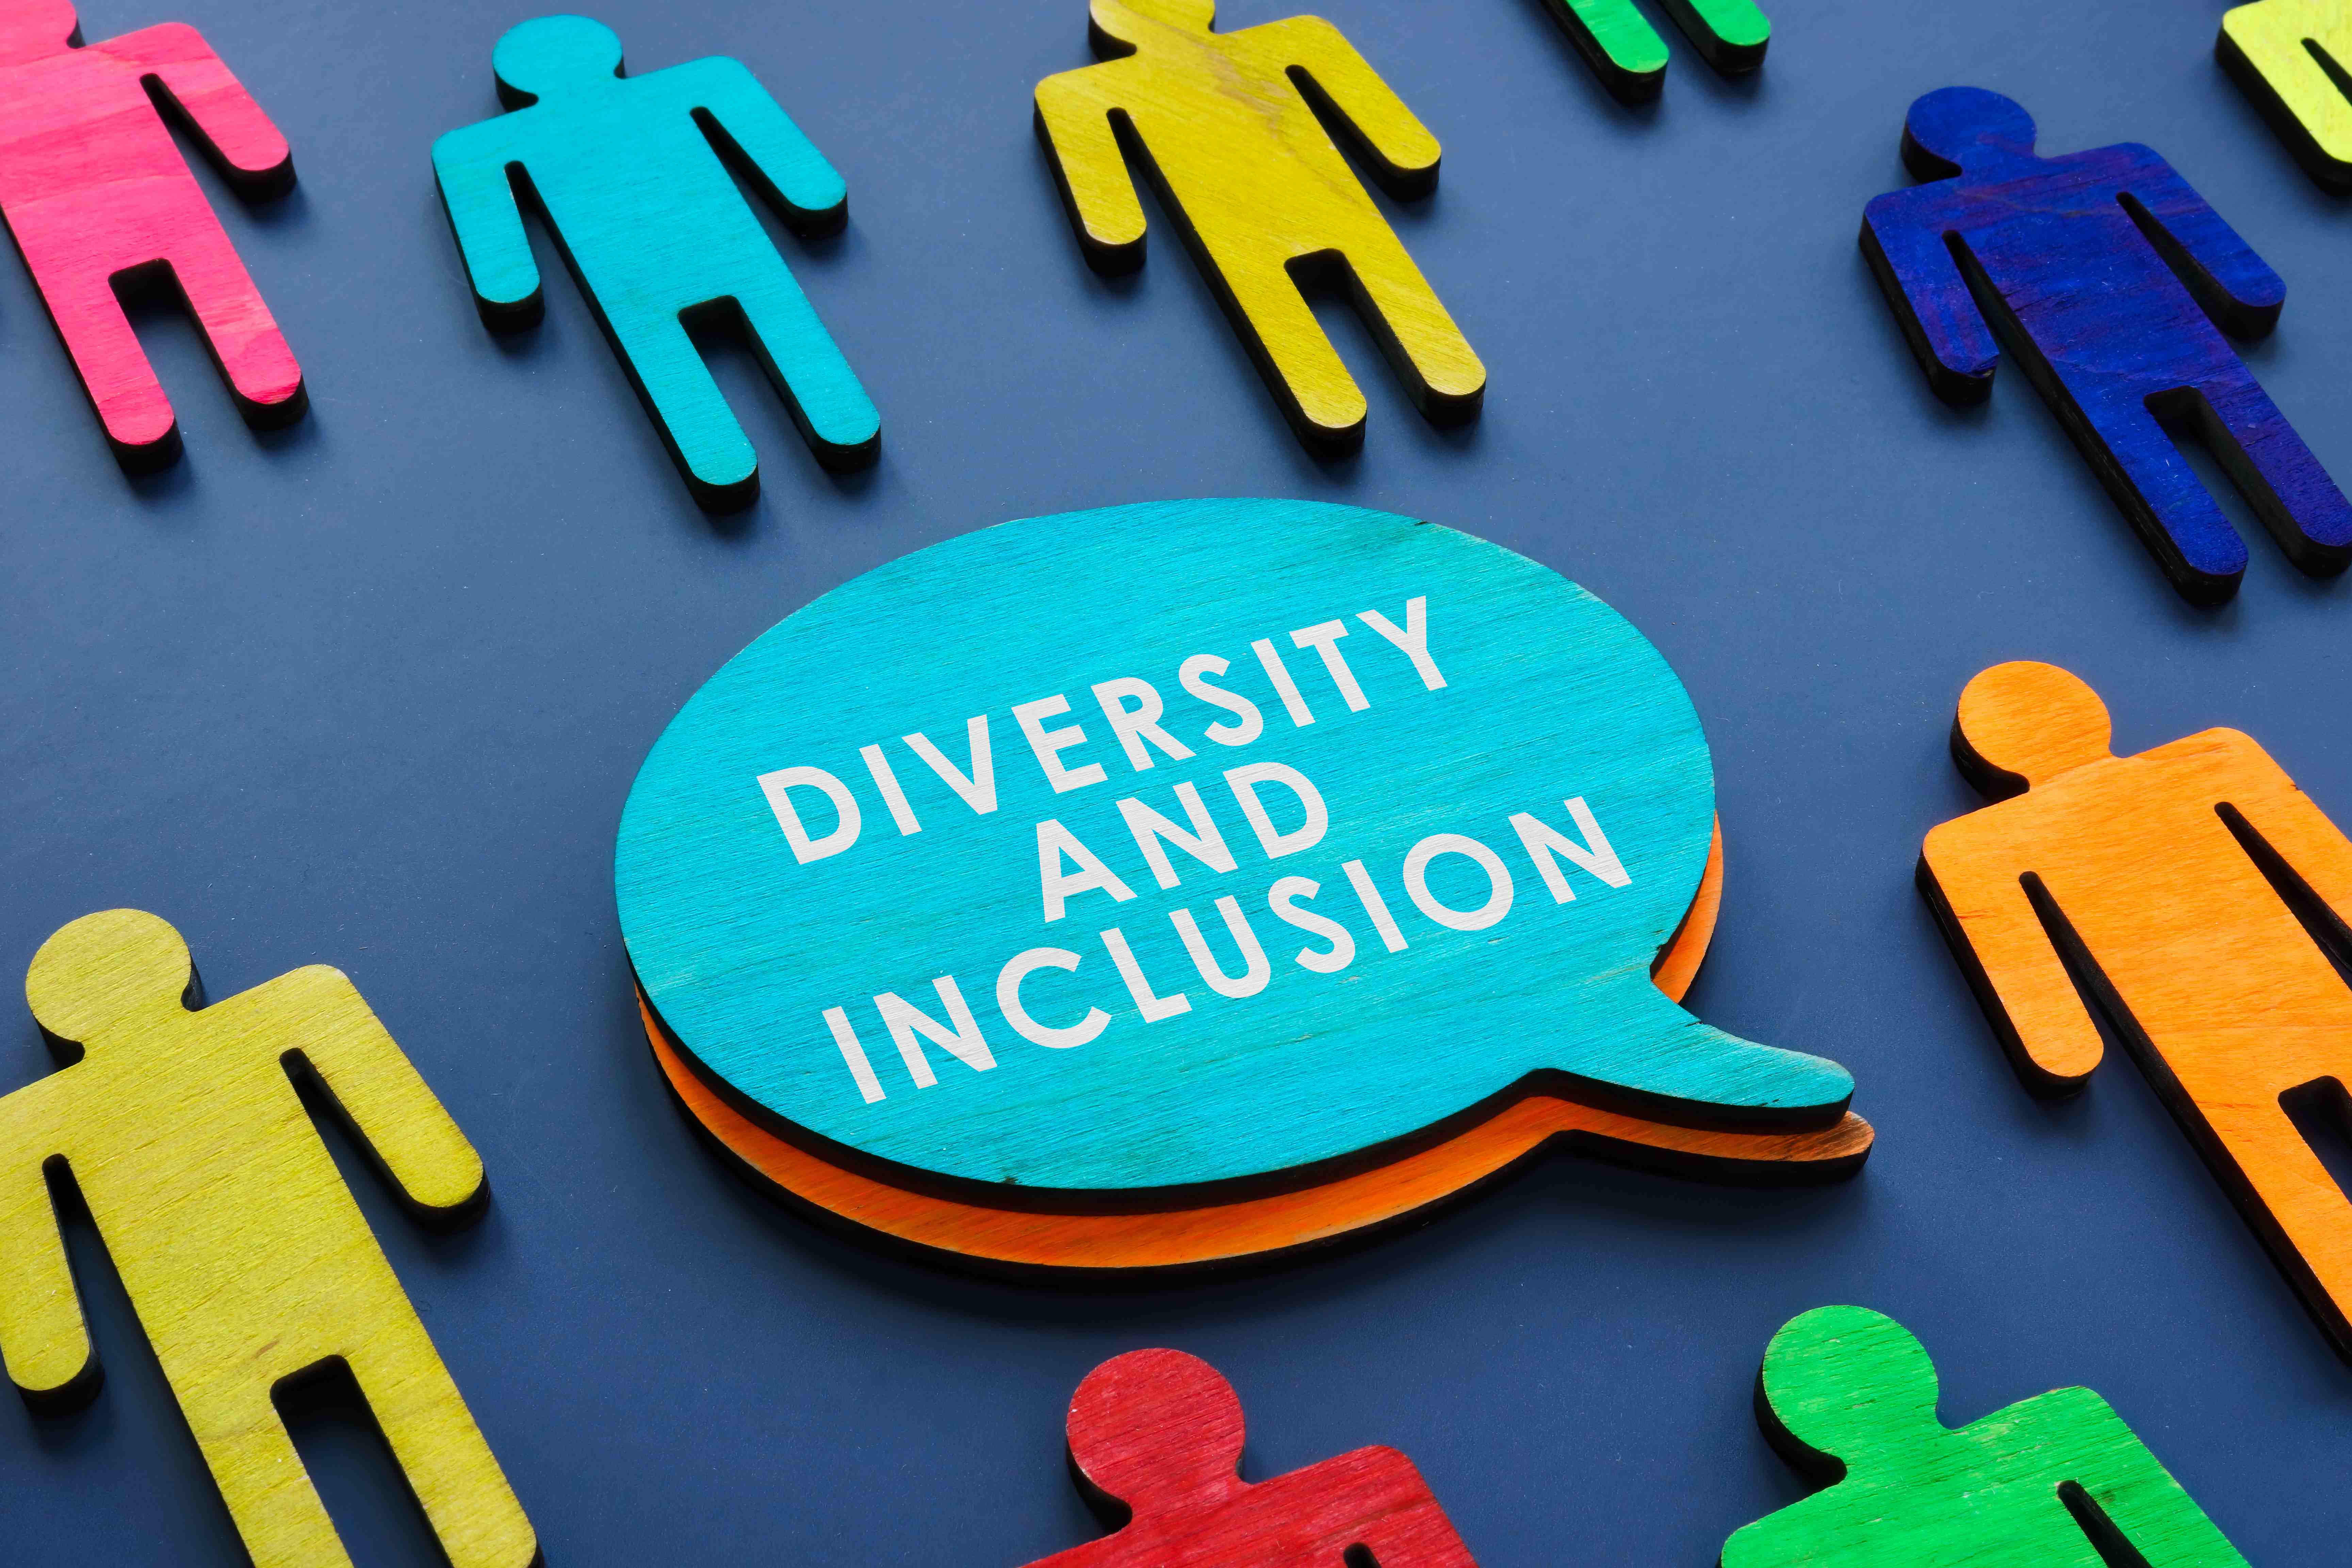 Diversity and Inclusion Initiatives